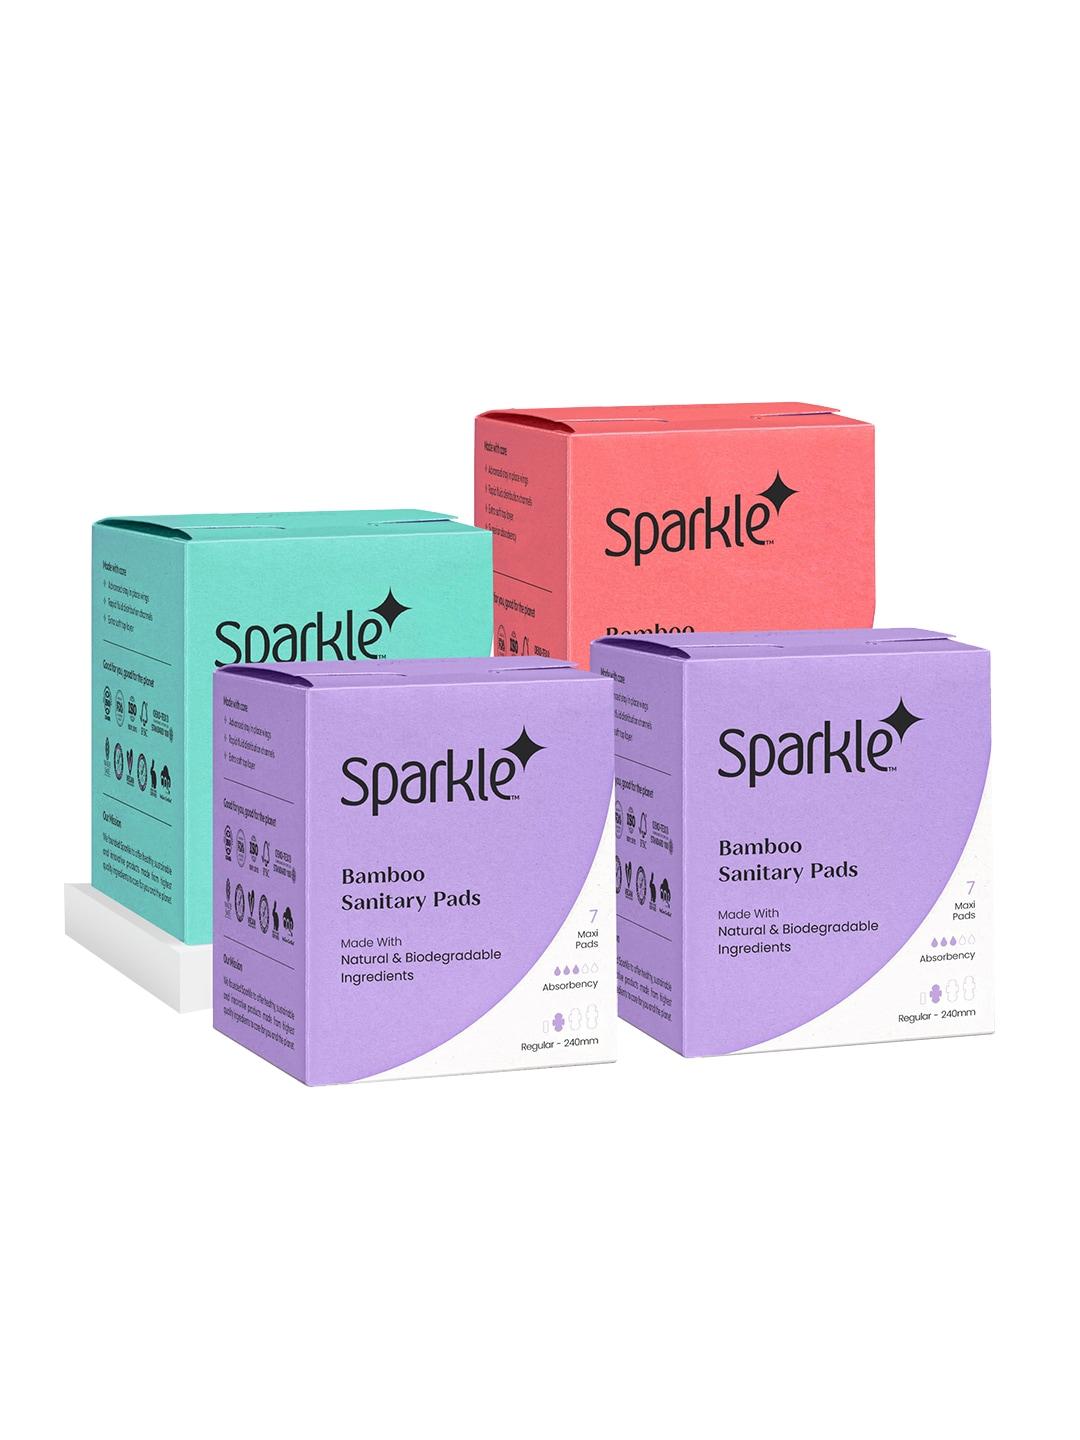 Sparkle Pack of 4 Bamboo Sanitary Pads- Regular 240mm, Large 280mm & Overnight 320mm